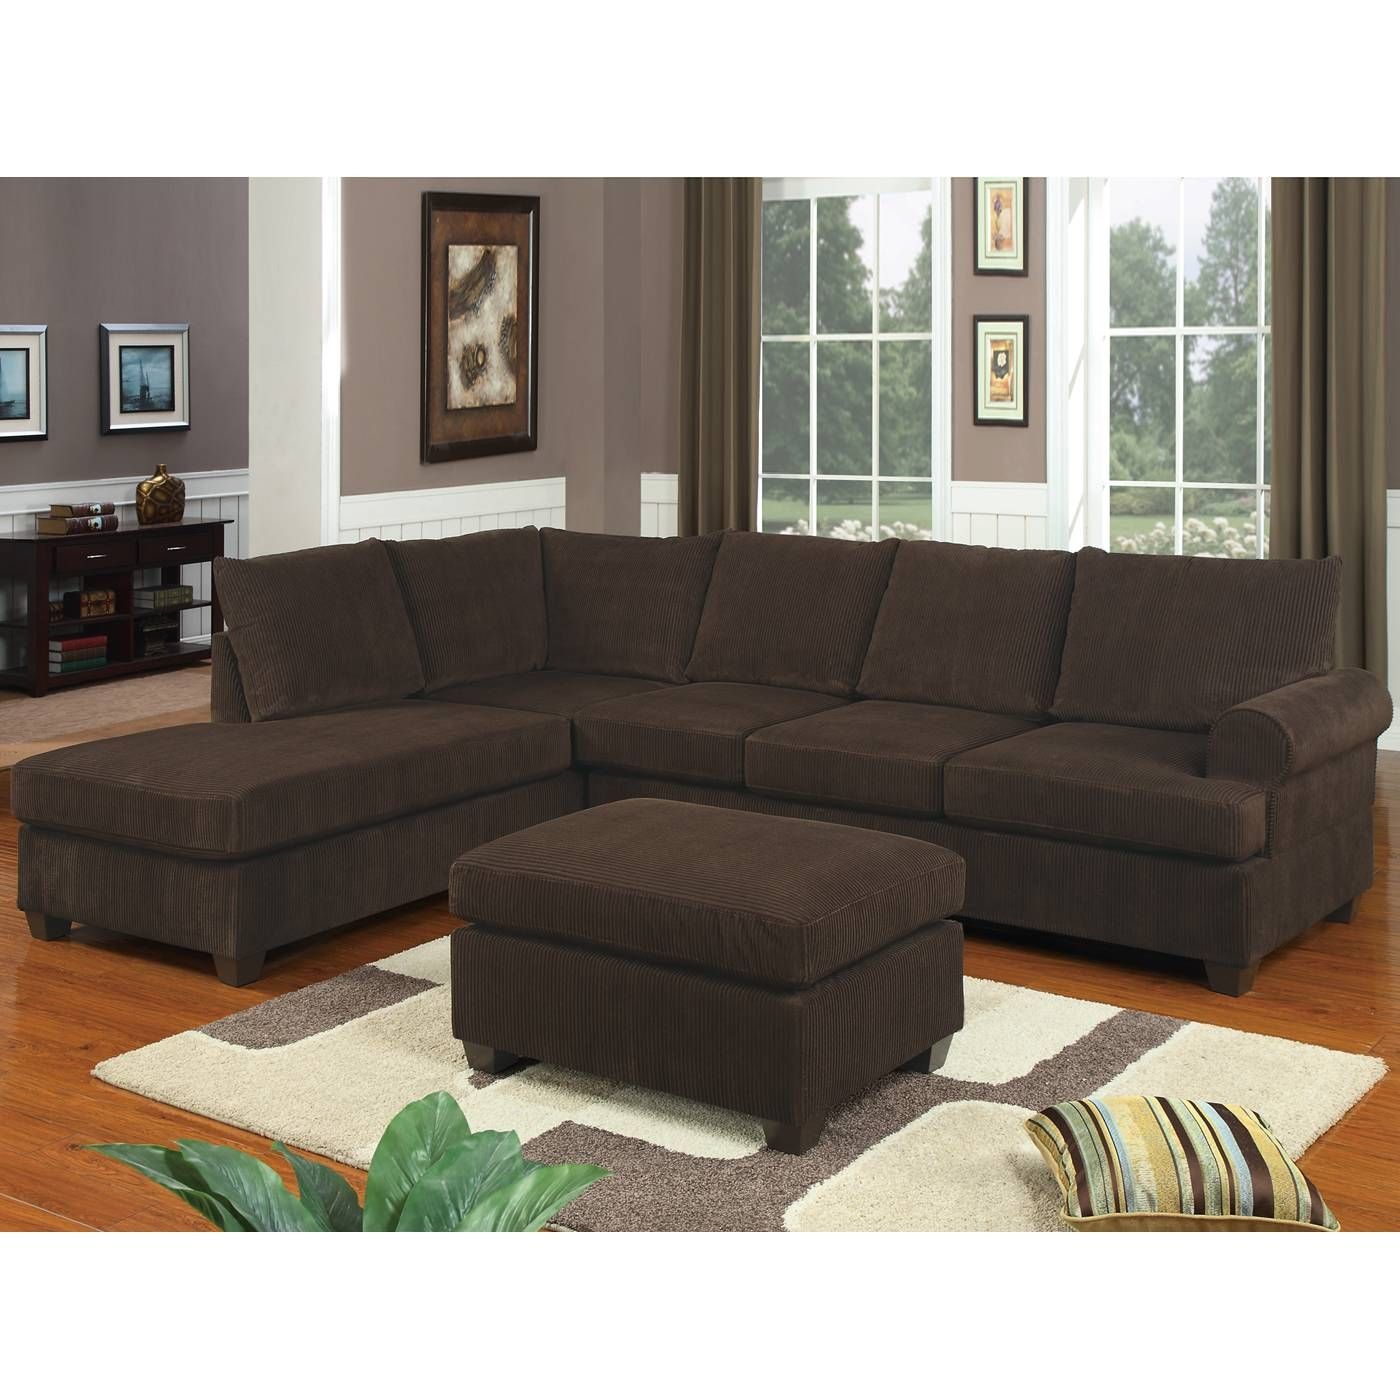 10 Foot Sectional Sofa – Tourdecarroll Intended For 10 Foot Sectional Sofa (Photo 110 of 299)